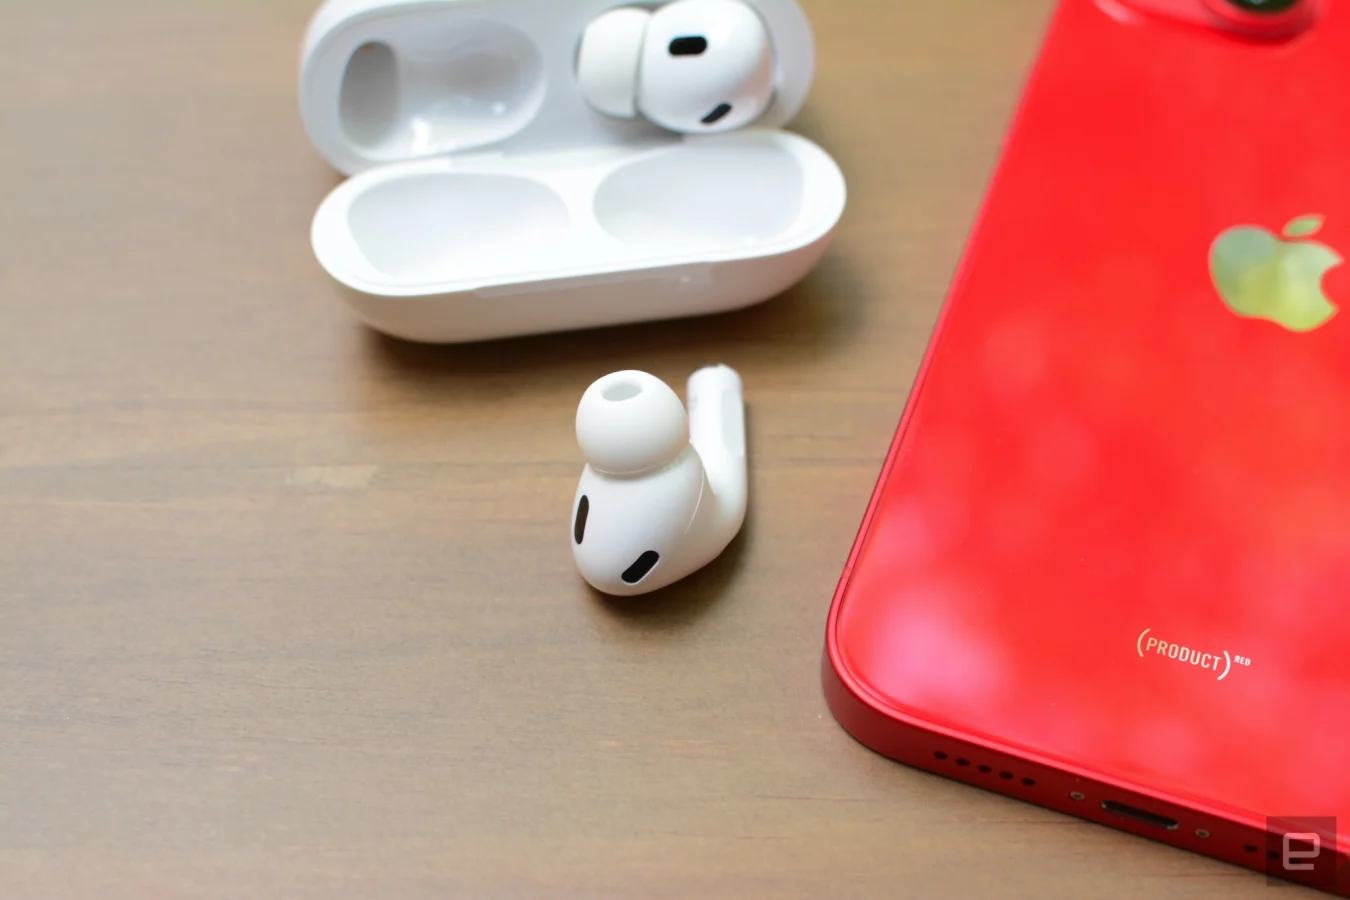 Despite the unchanged design, Apple has included a variety of updates to the new AirPods Pro. All the comforts of the 2019 model are here too, along with additions like Adaptive Transparency, Custom Spatial Audio, and a new touch gesture.  There's room to further refine the familiar formula, but Apple has given iPhone owners several reasons to upgrade.